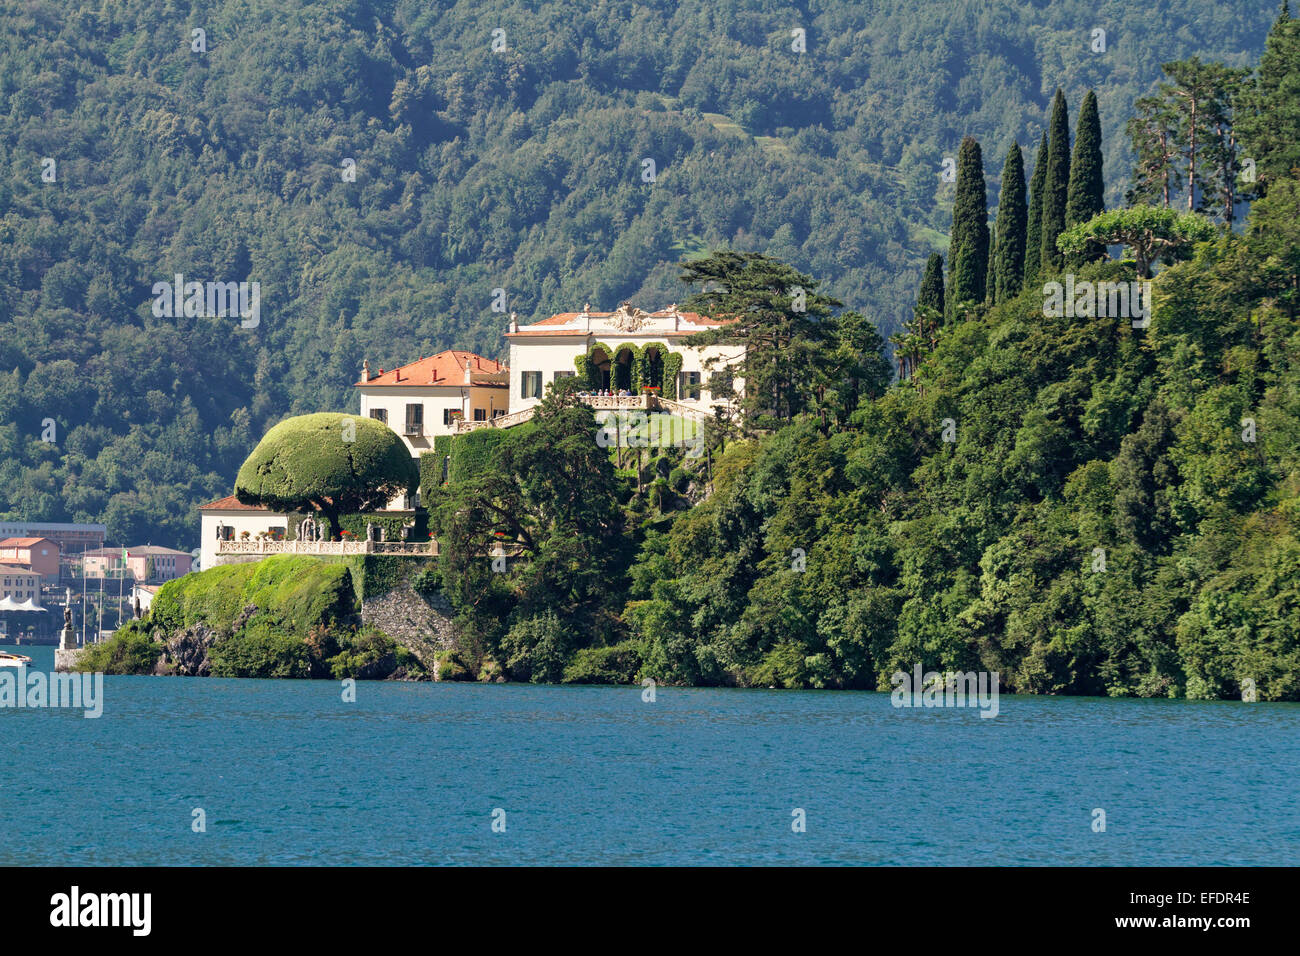 Low Angle View of Villa Balbianello Lenno, Côme, Lac de Côme, Lombardie, Italie Banque D'Images